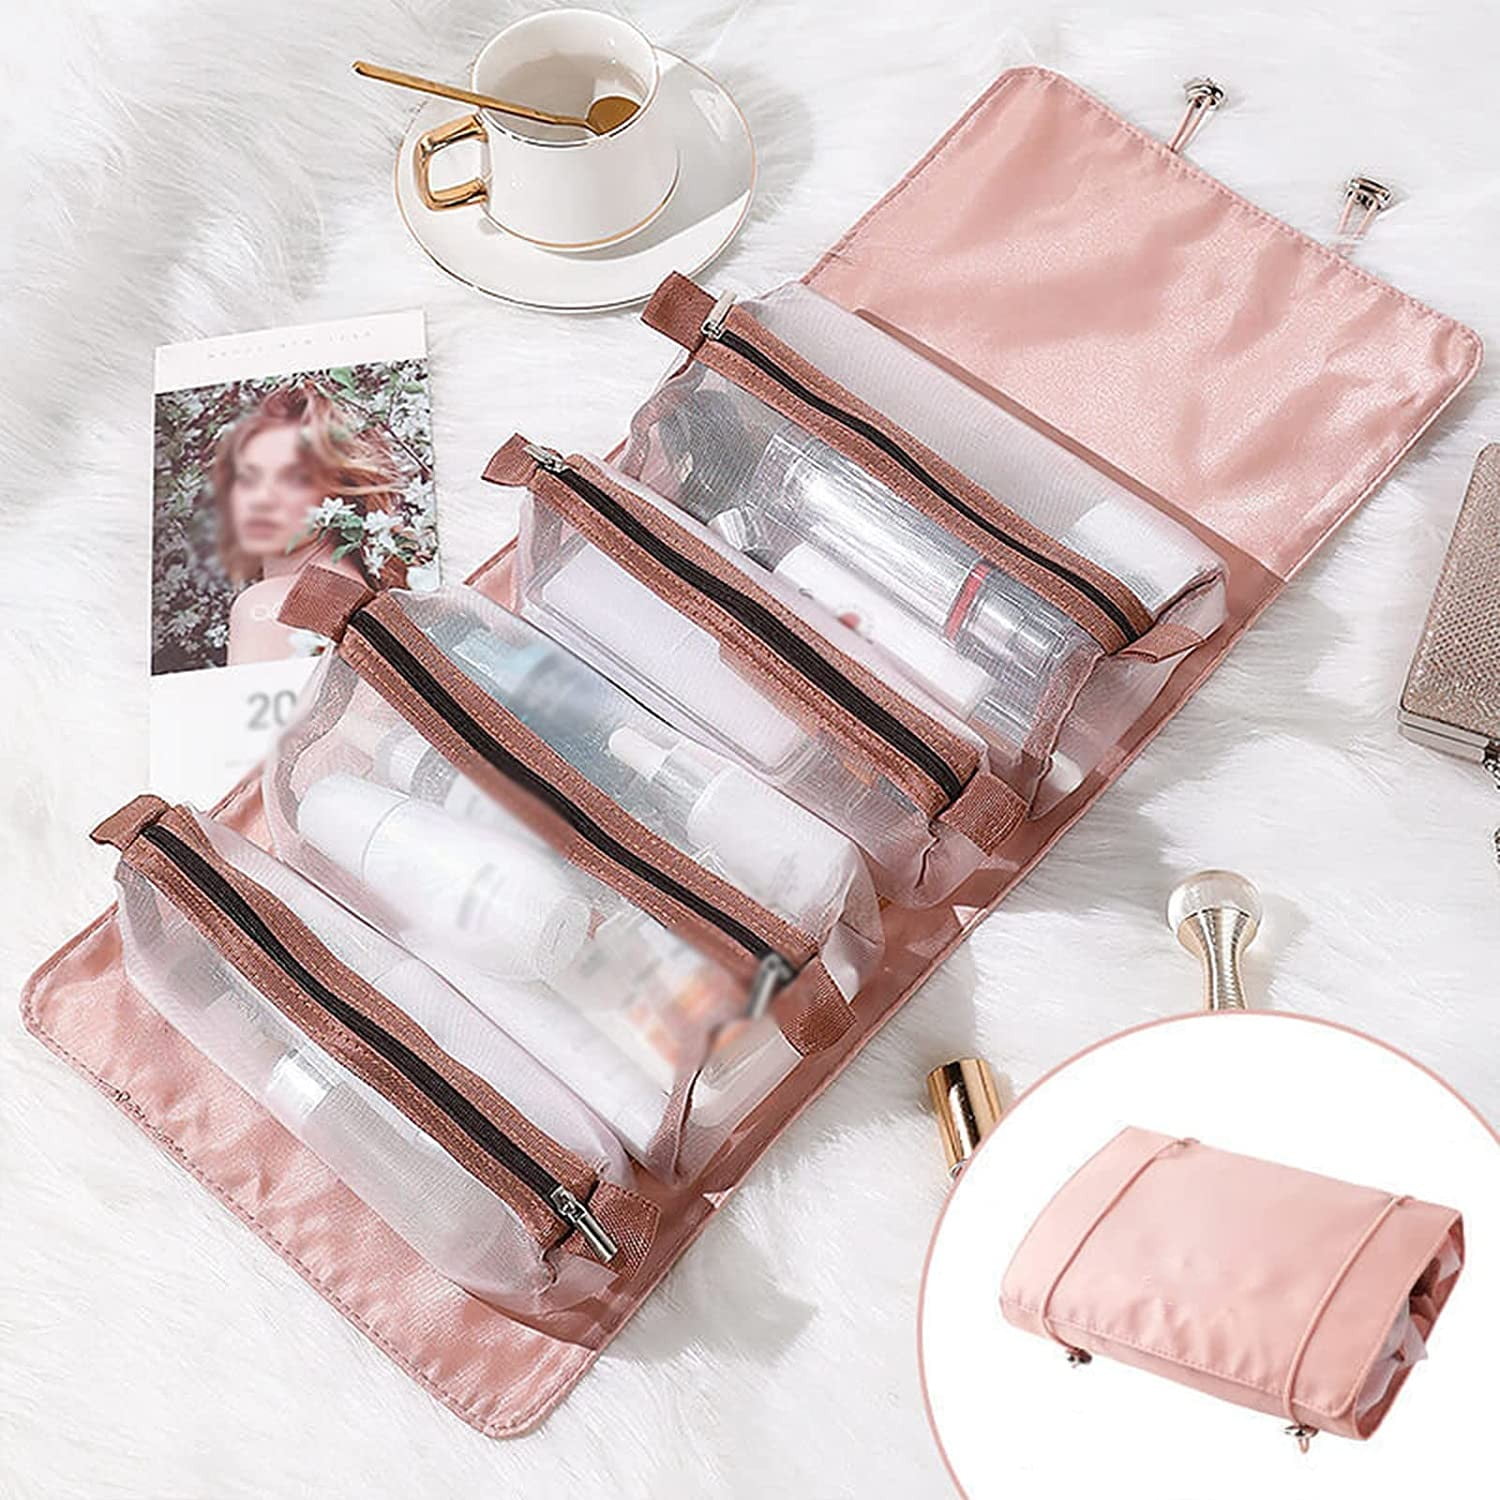 4kits Hanging Roll-Up Makeup Bag/Toiletry Kit/Travel Organizer for Women -  4 Removable Storage Bags …See more 4kits Hanging Roll-Up Makeup